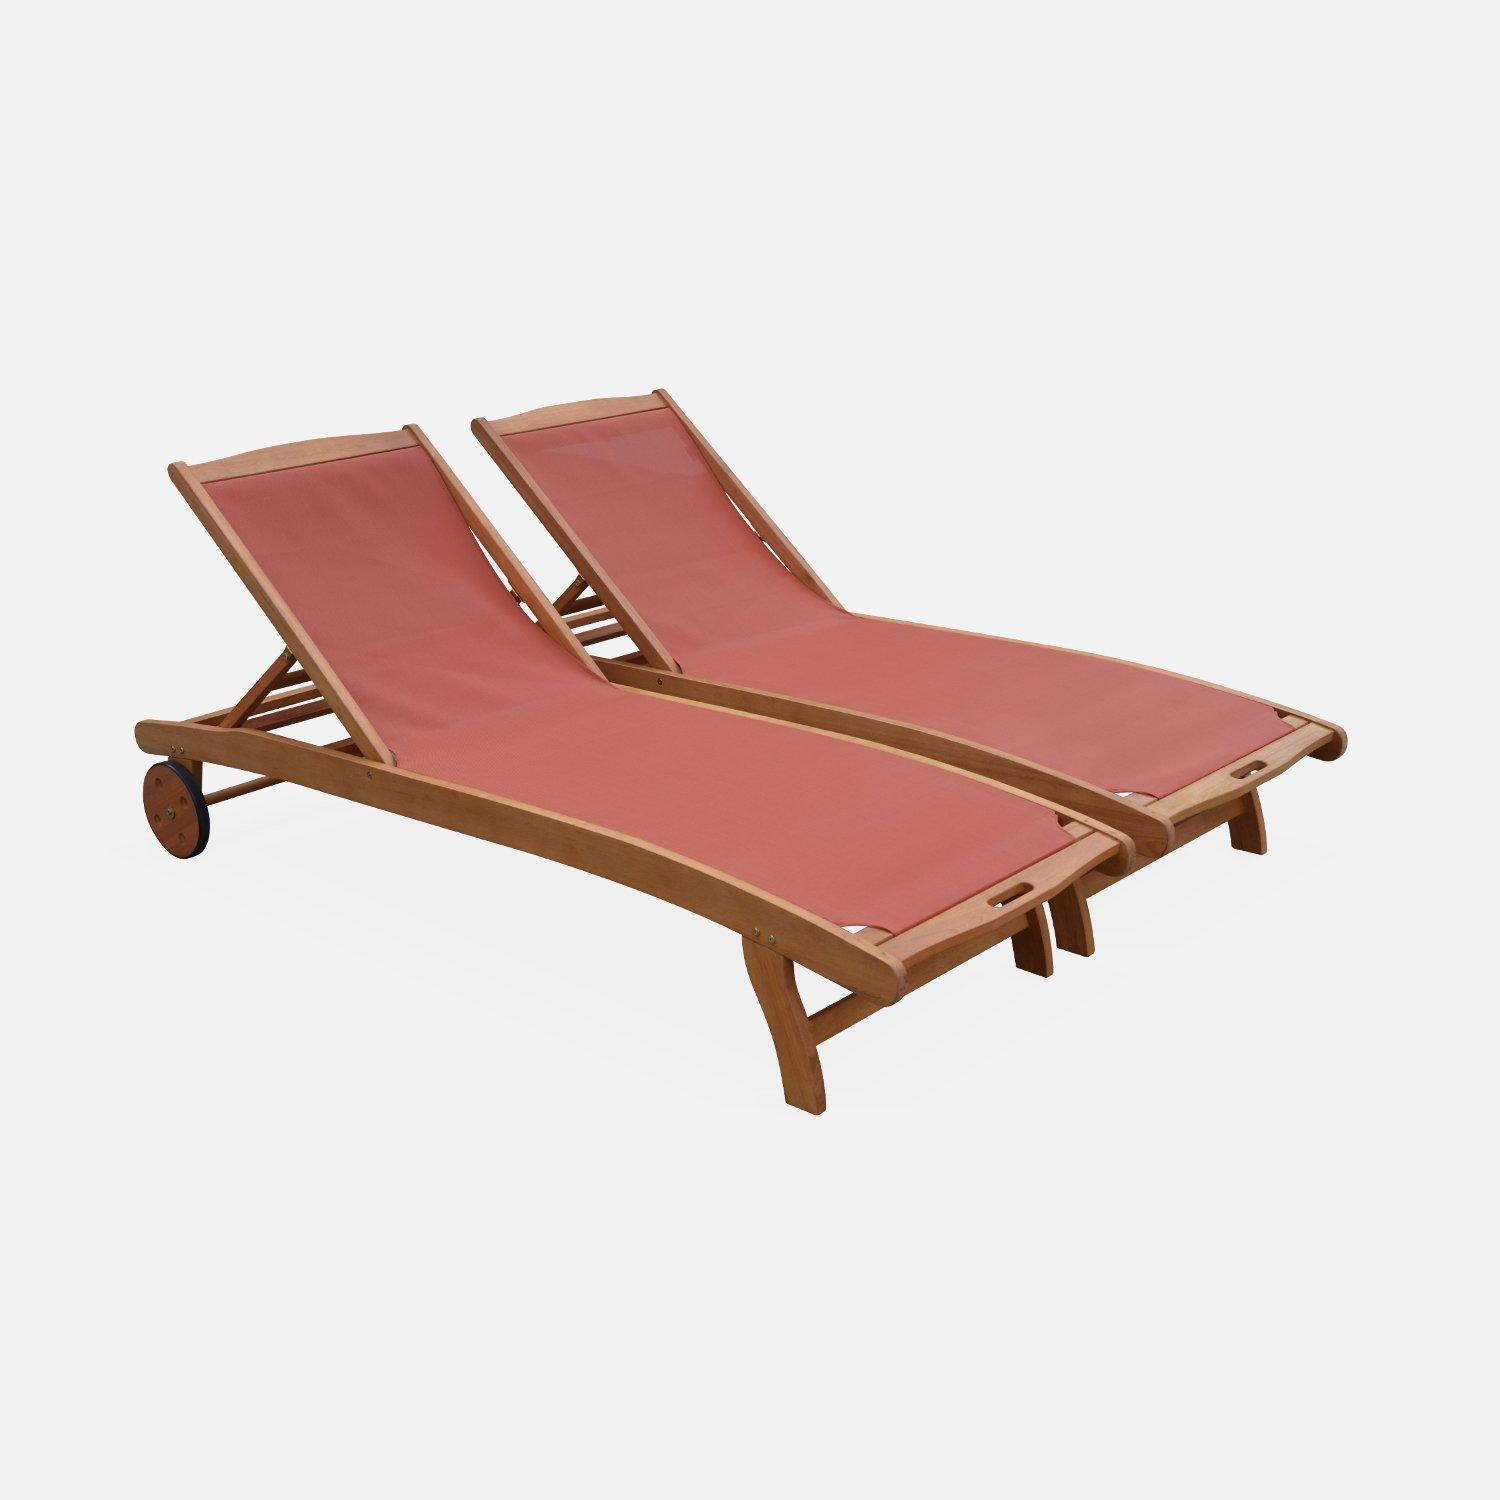 Pair Of Wooden And Textilene Sun Loungers - image 1